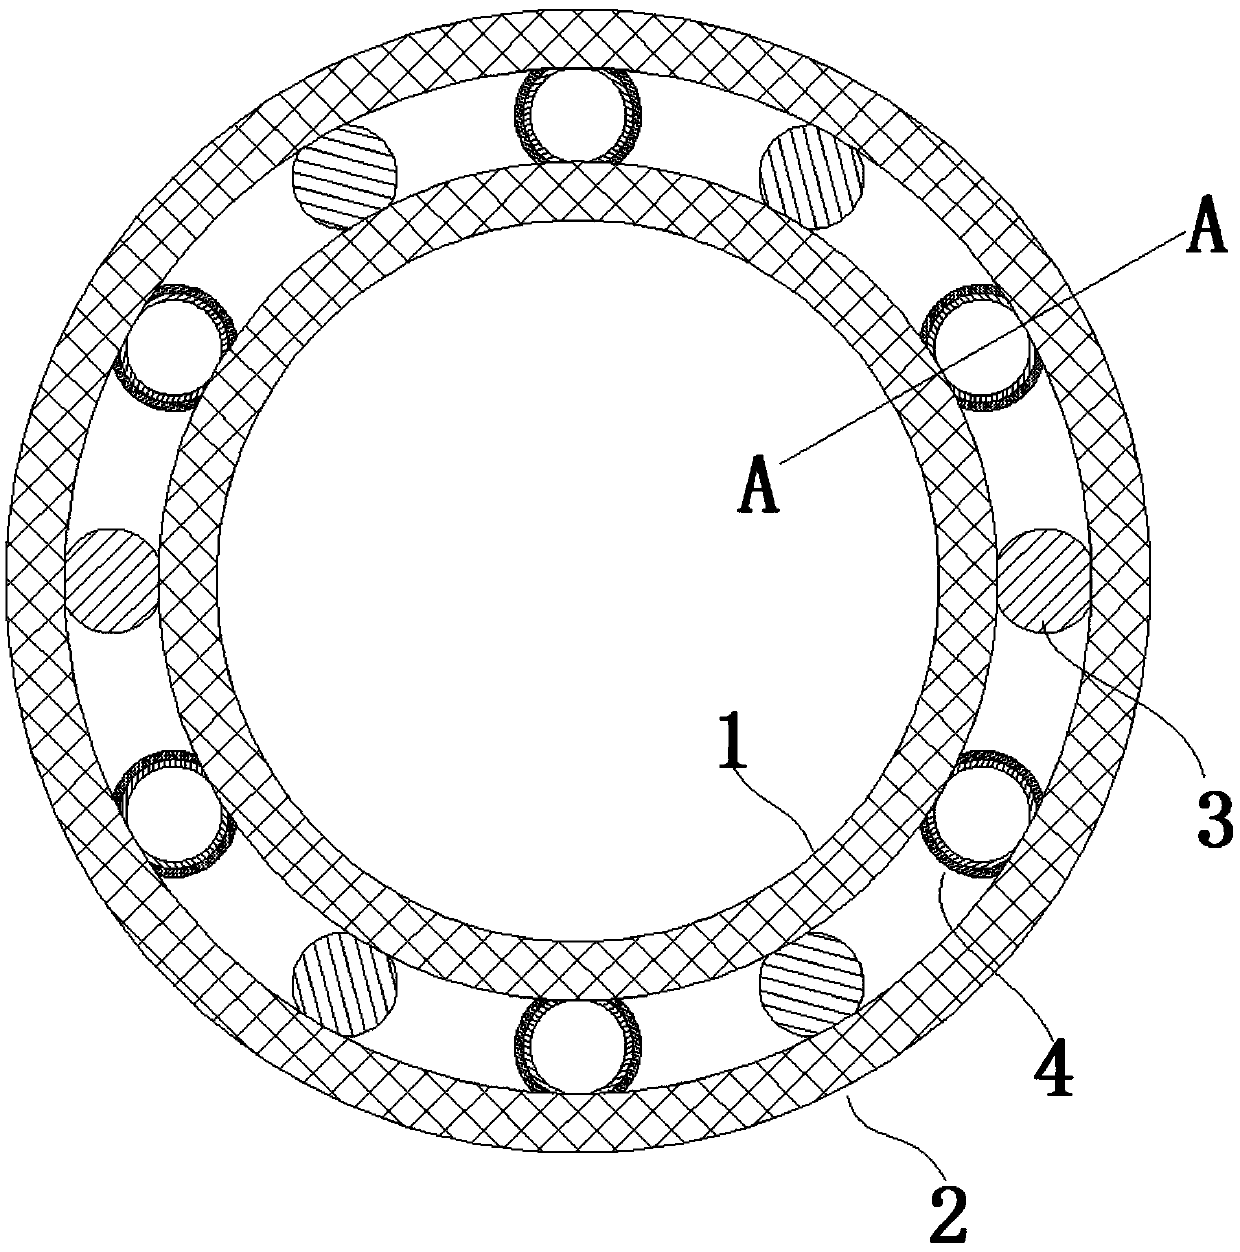 Coordination structure device of high-revolving-speed bearing and balls of high-revolving-speed bearing